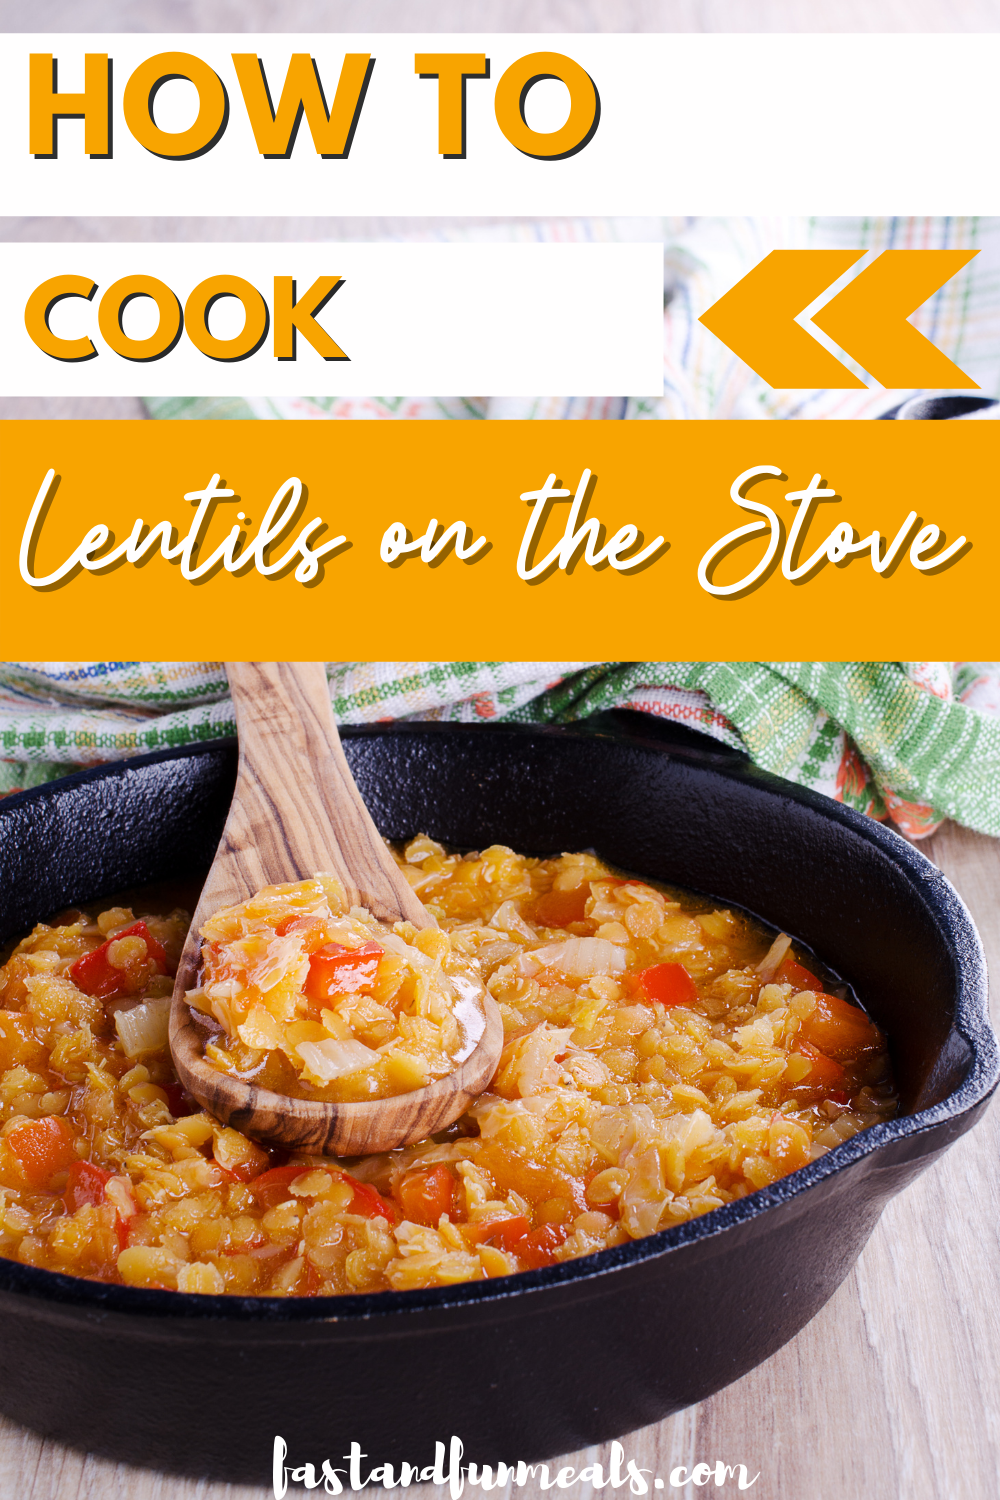 Pin showing the title How to Cook Lentils on the Stove